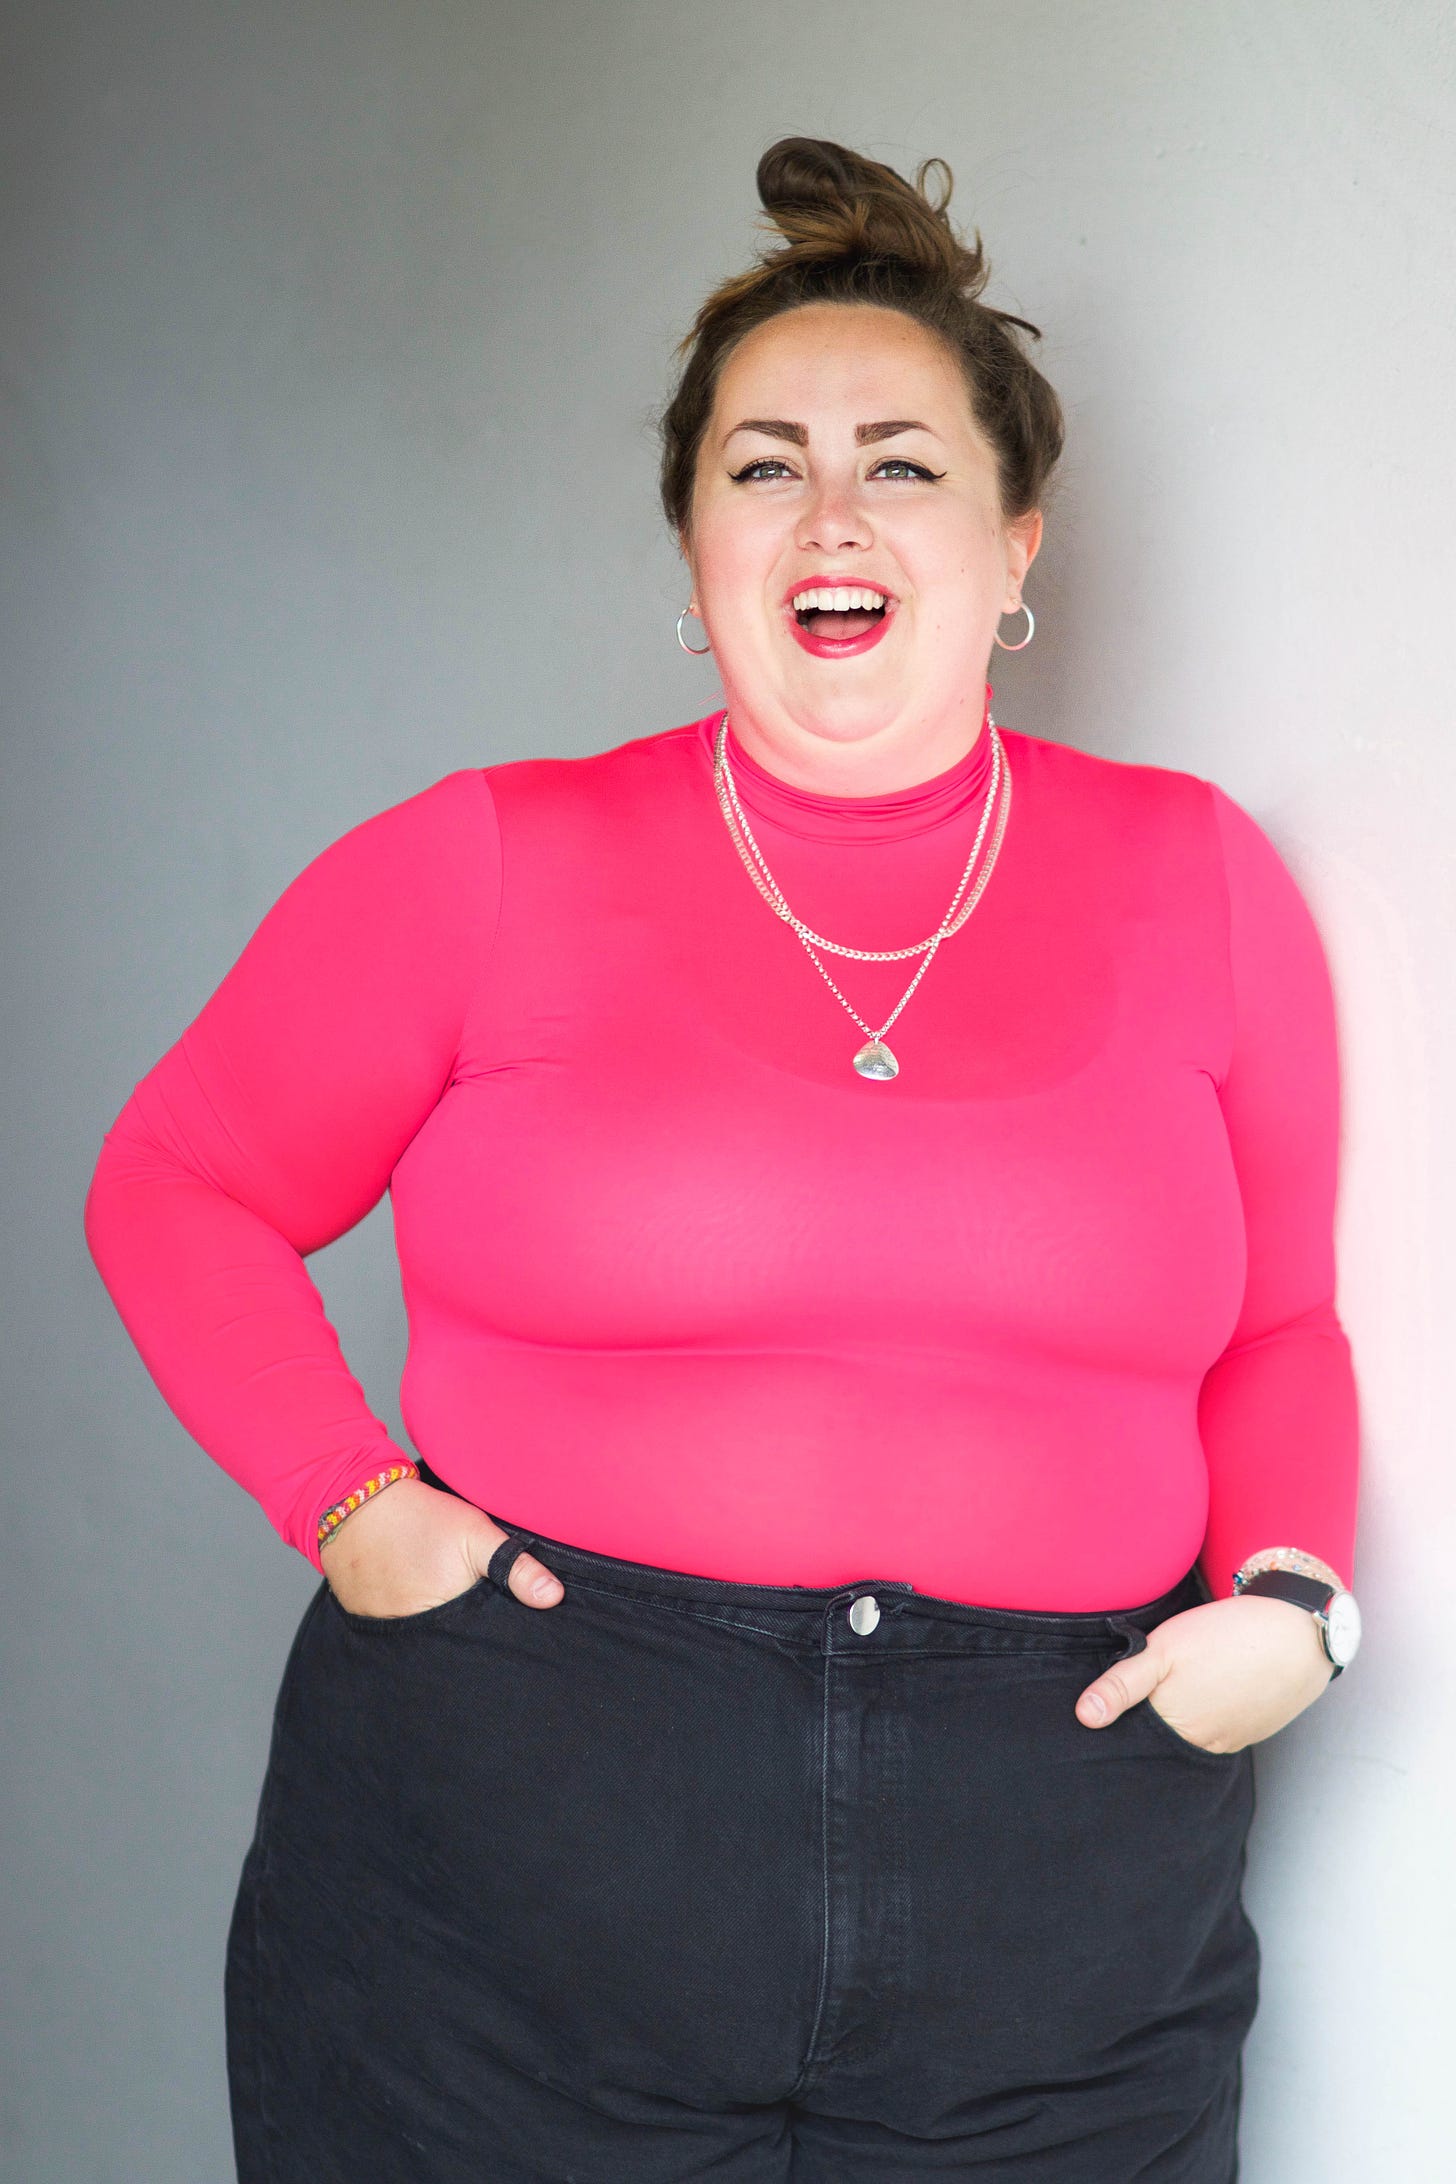 Headshot of Katie Greenall, wearing a pink turtleneck jumper, standing against a blank wall